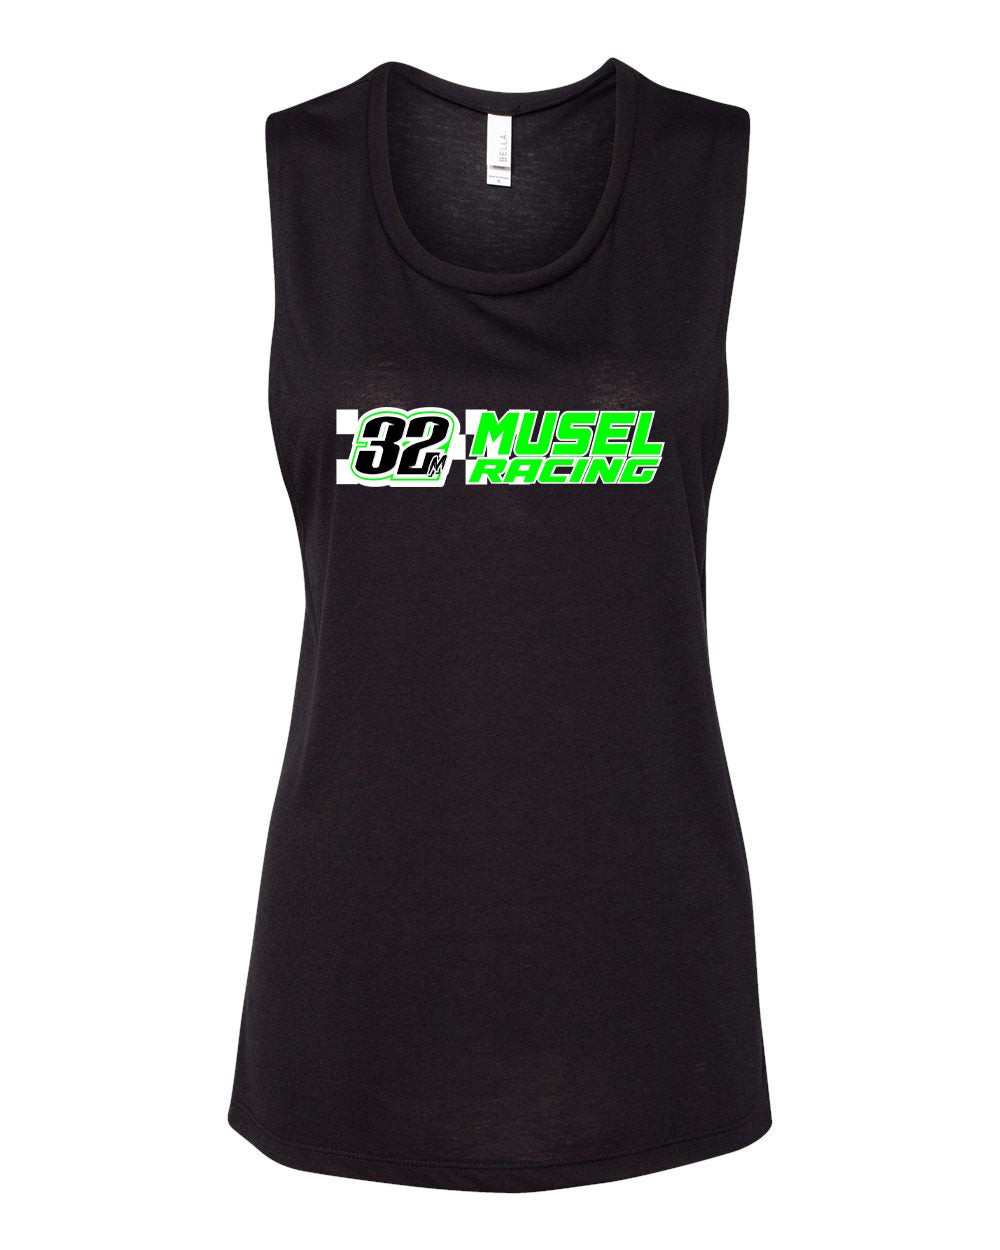 Musel Racing Checkered Black Muscle Tank